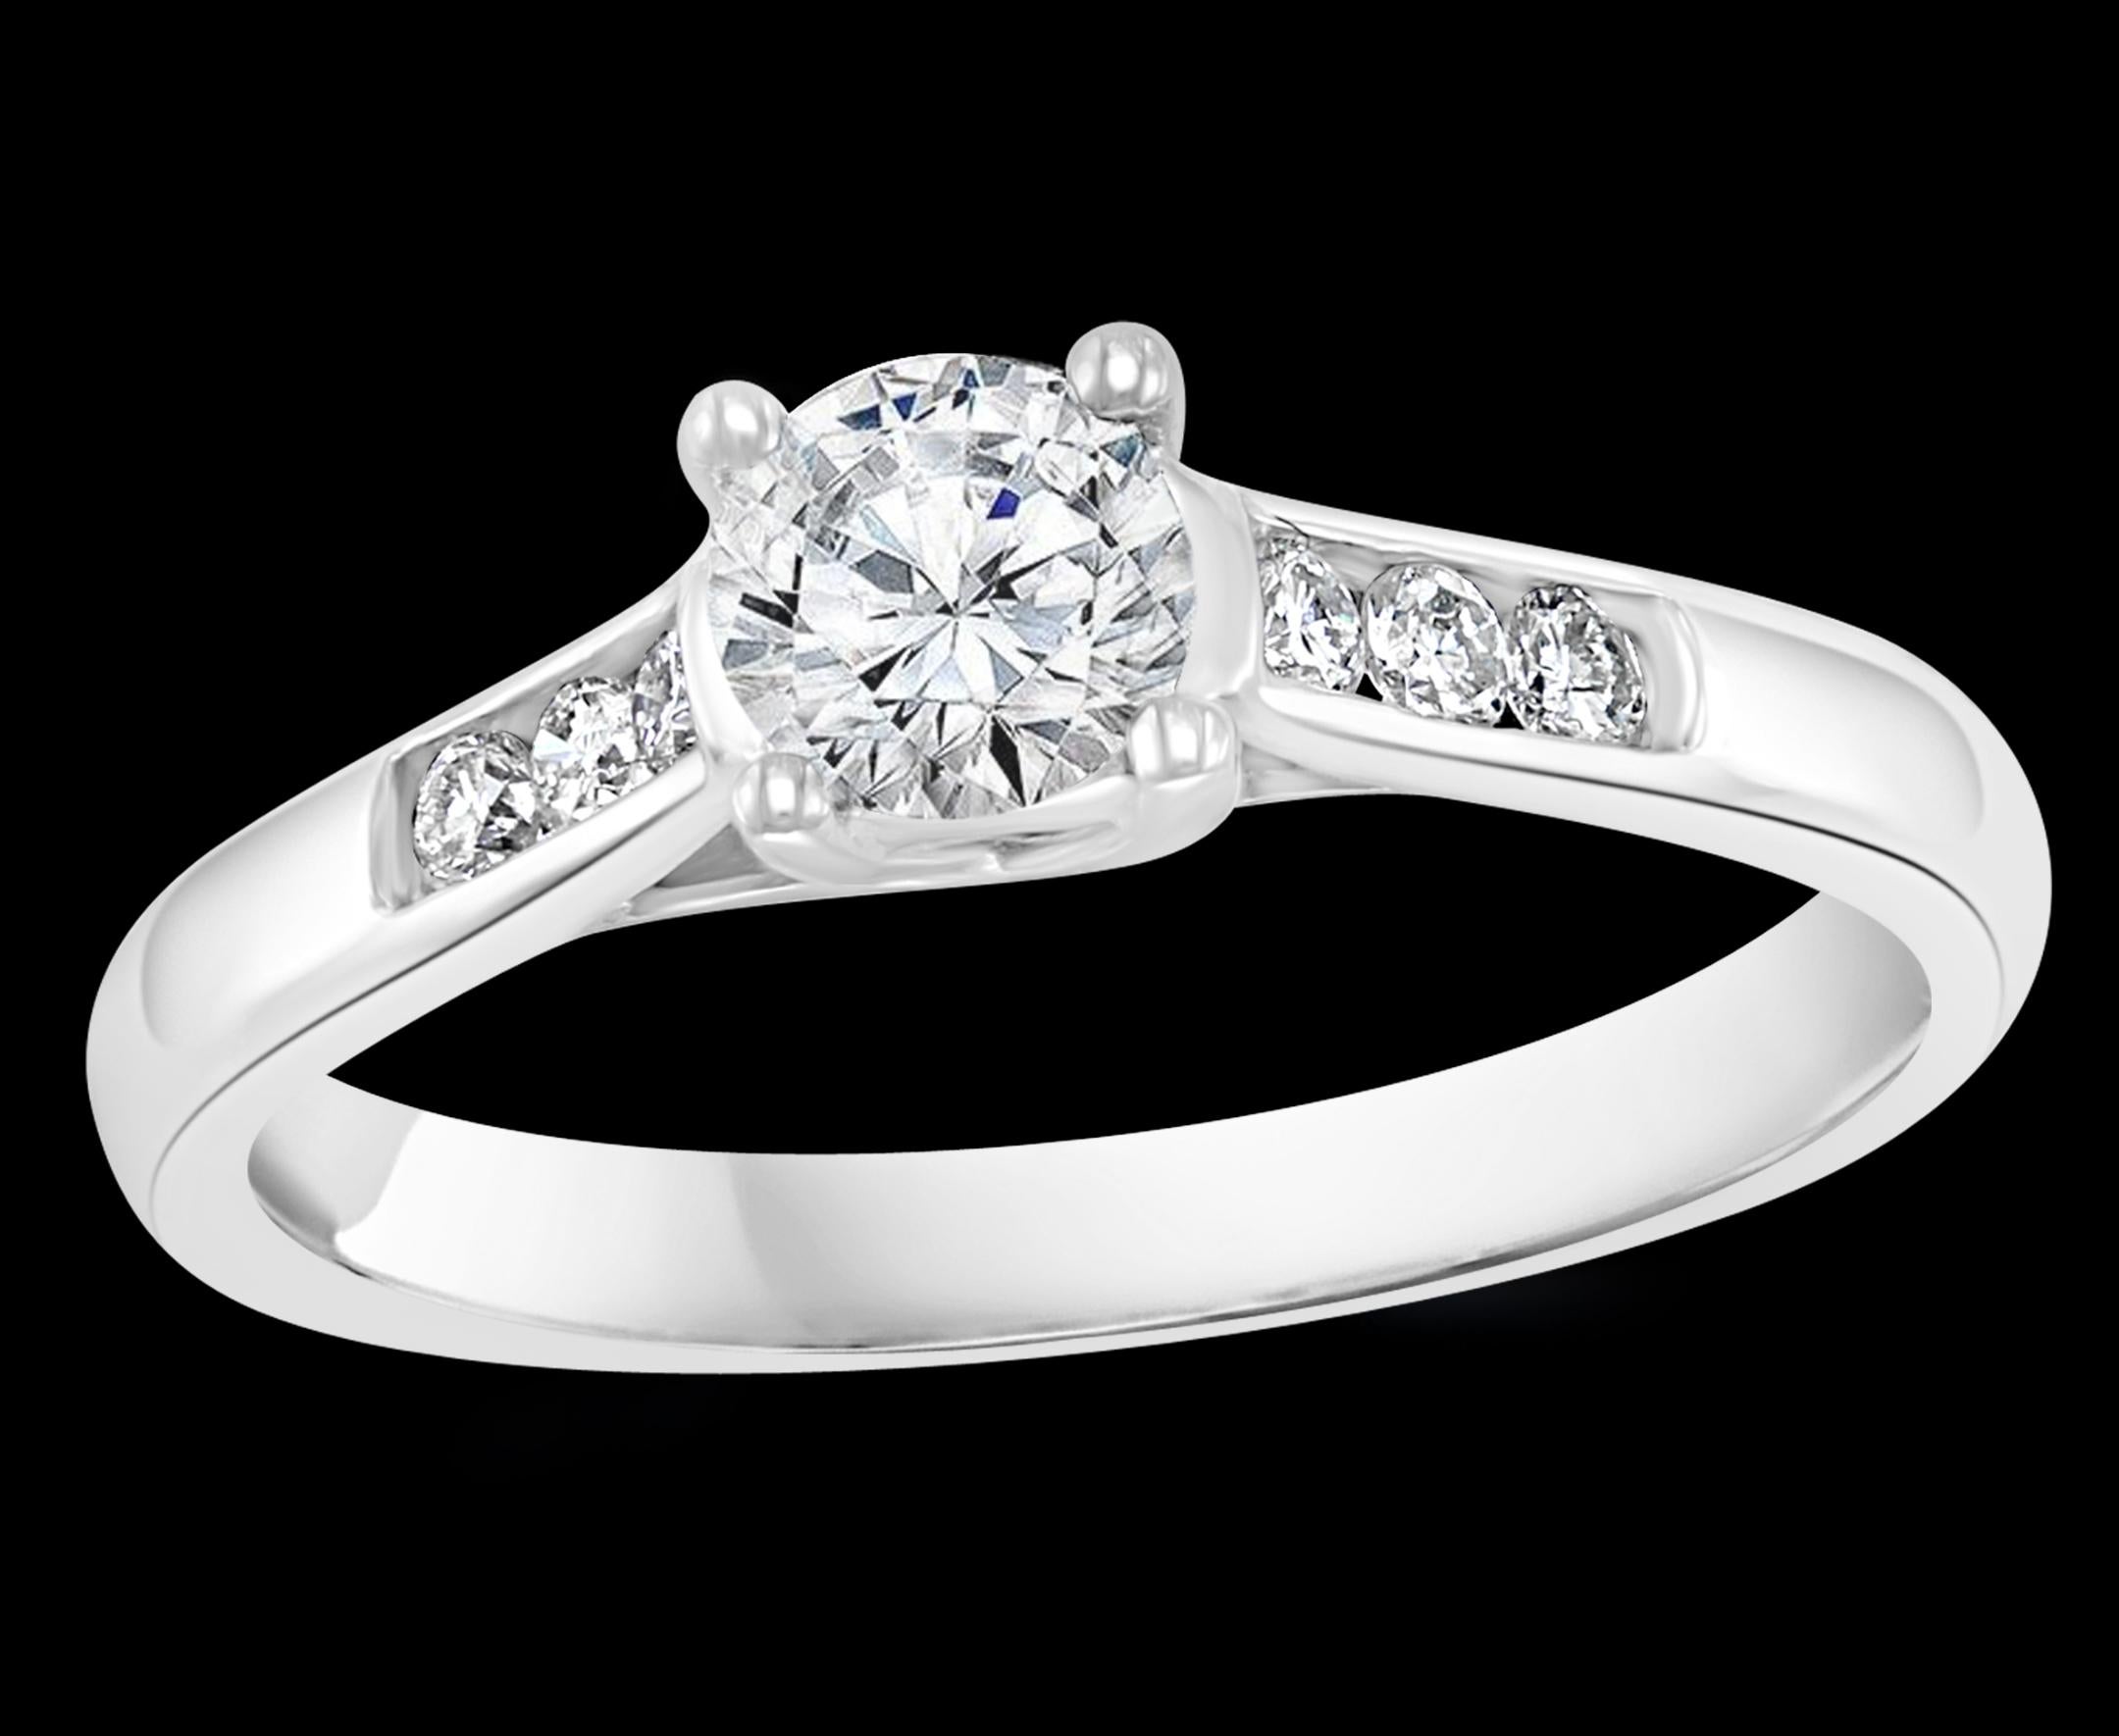 0.75 Carat Diamond  Traditional Ring/Band 14 Karat White Gold

Brilliant cut solitaire round diamond approximately 0,6 ct and 6 brilliant cut diamond, three on each side   next to each other .
Center stone is approximately 60 pointer while the side